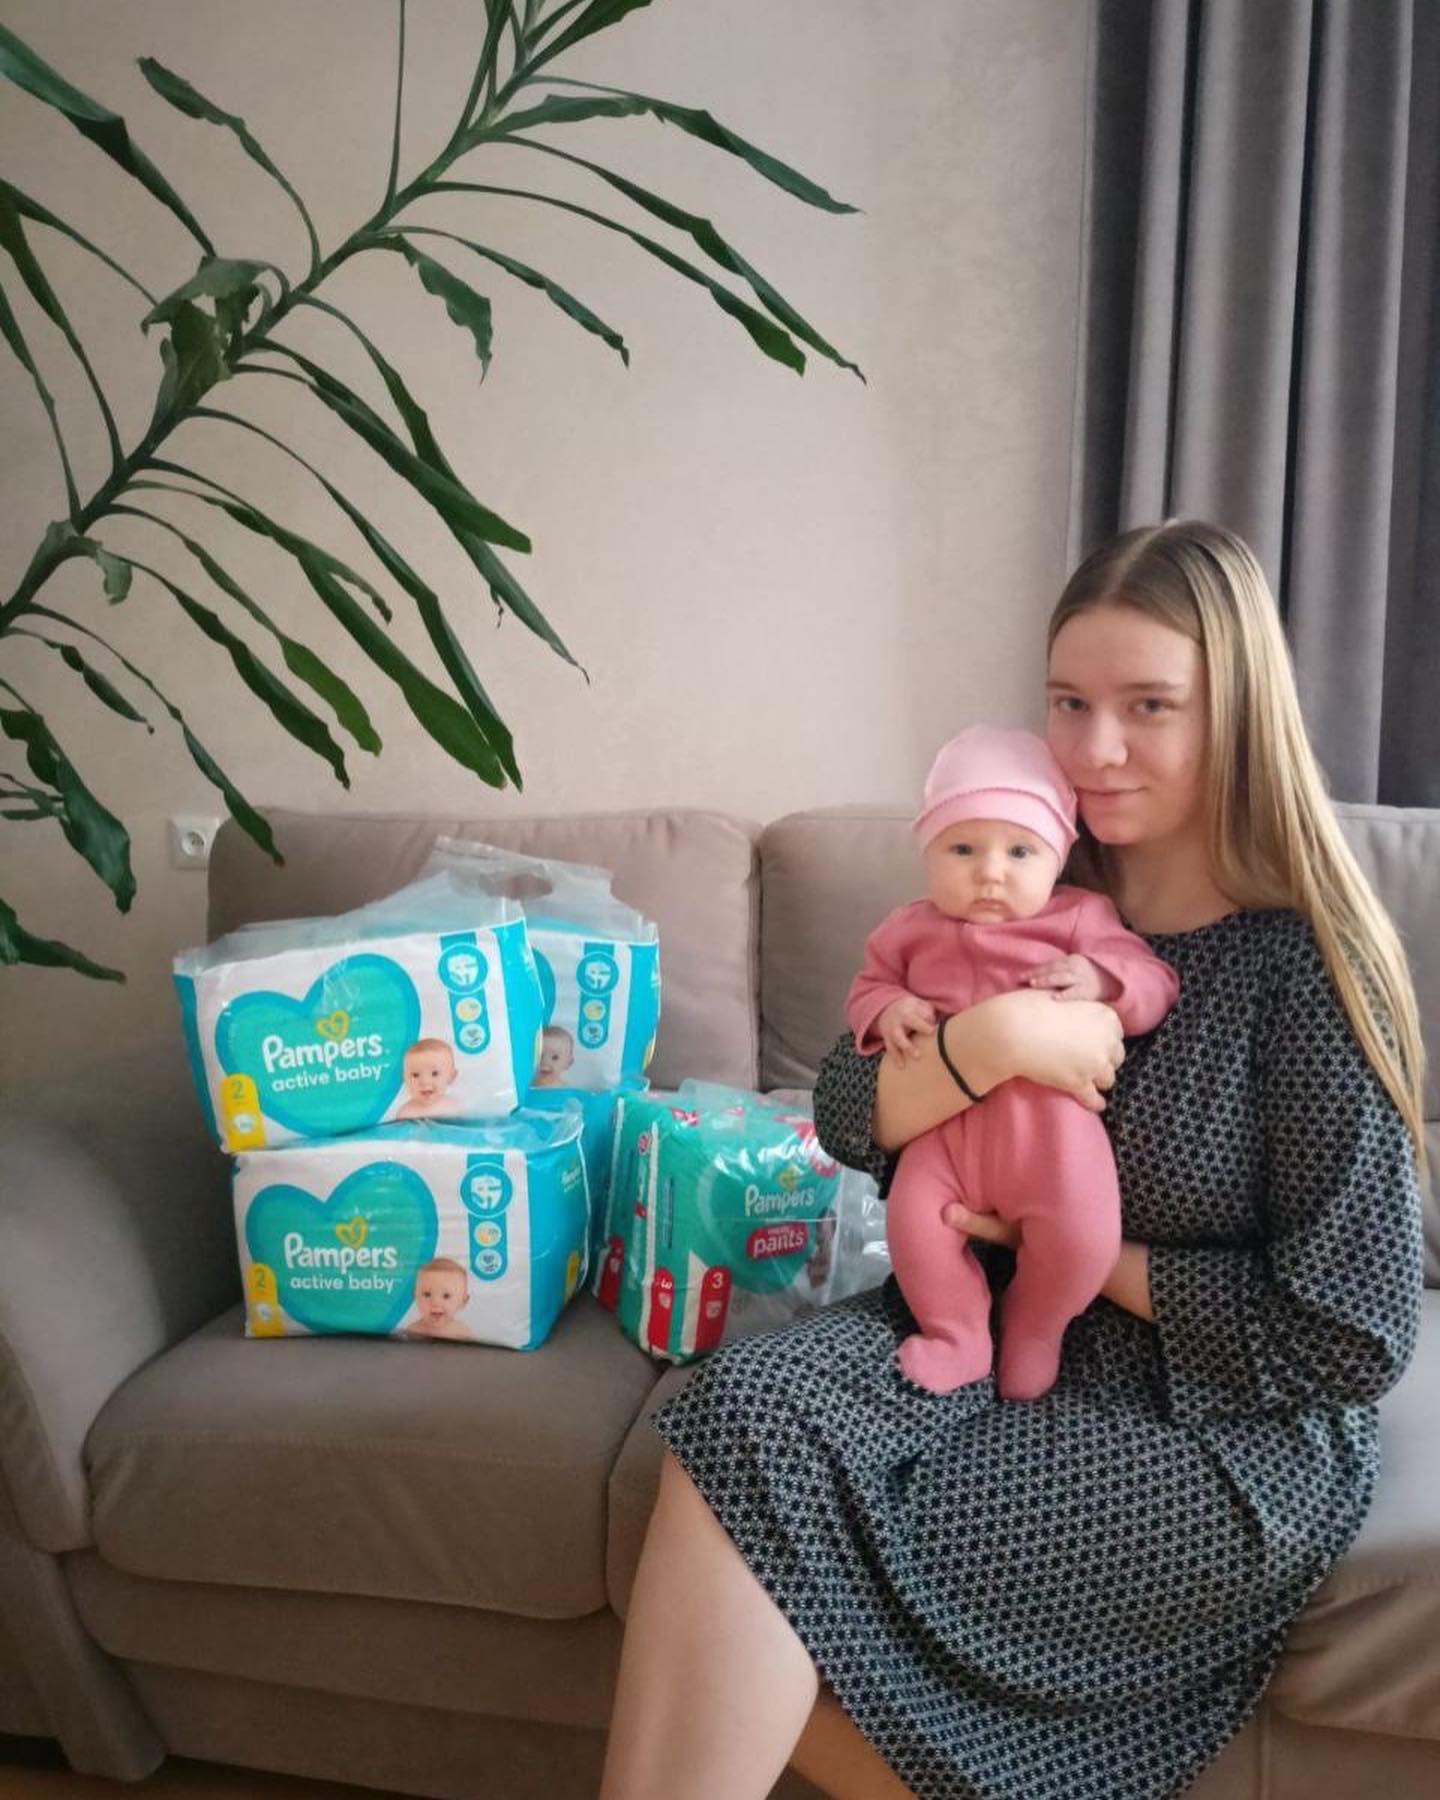 A woman with a baby sitting on a couch next to a box of pampers diapers.